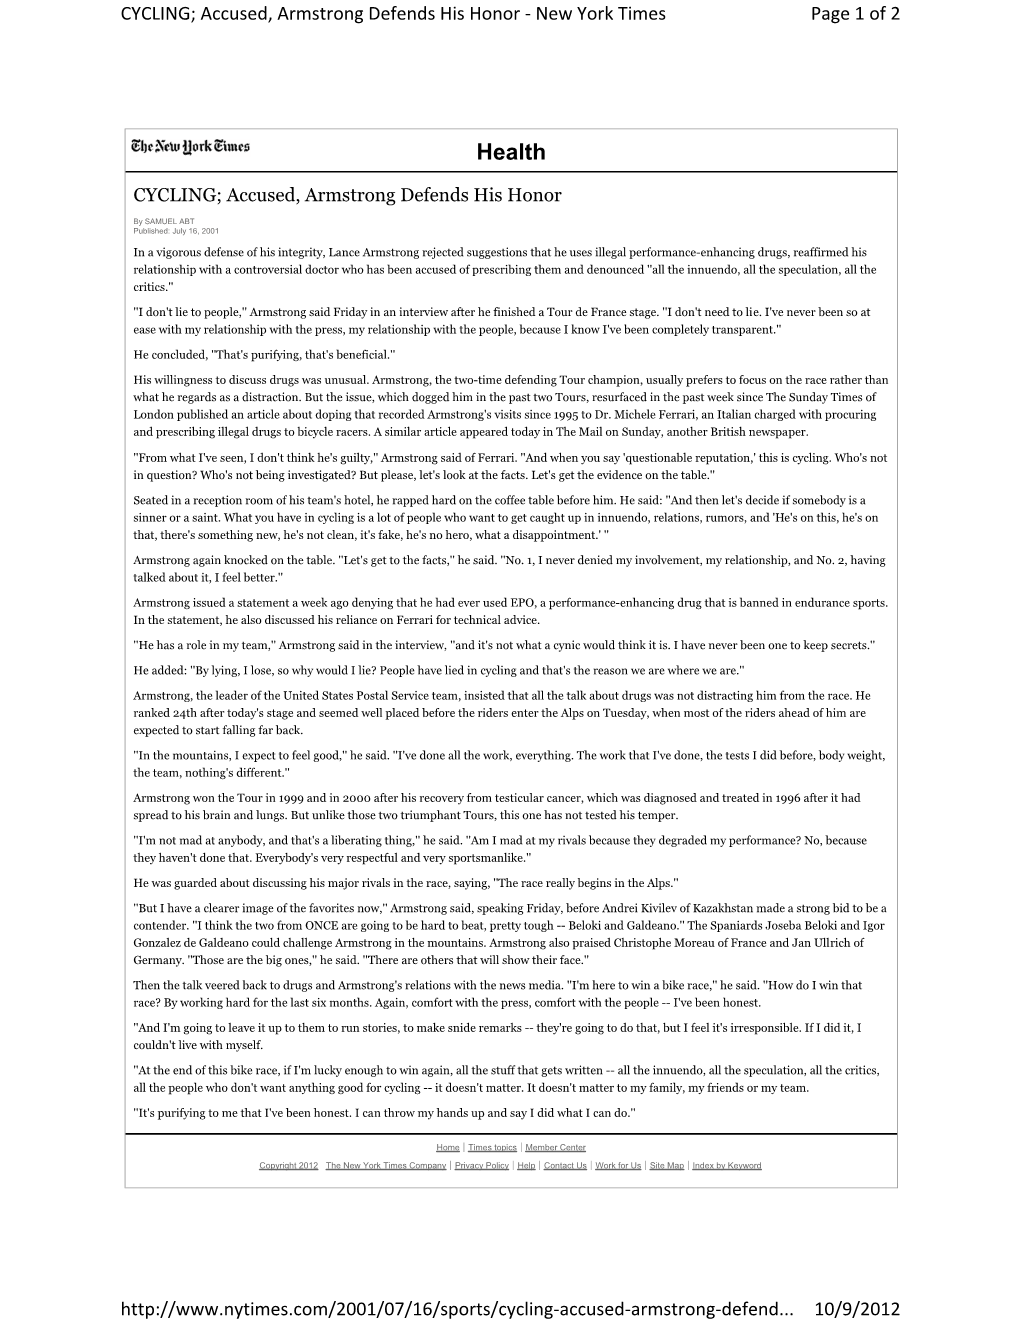 2001-07-16 Accused, Armstrong Defends His Honor.Pdf